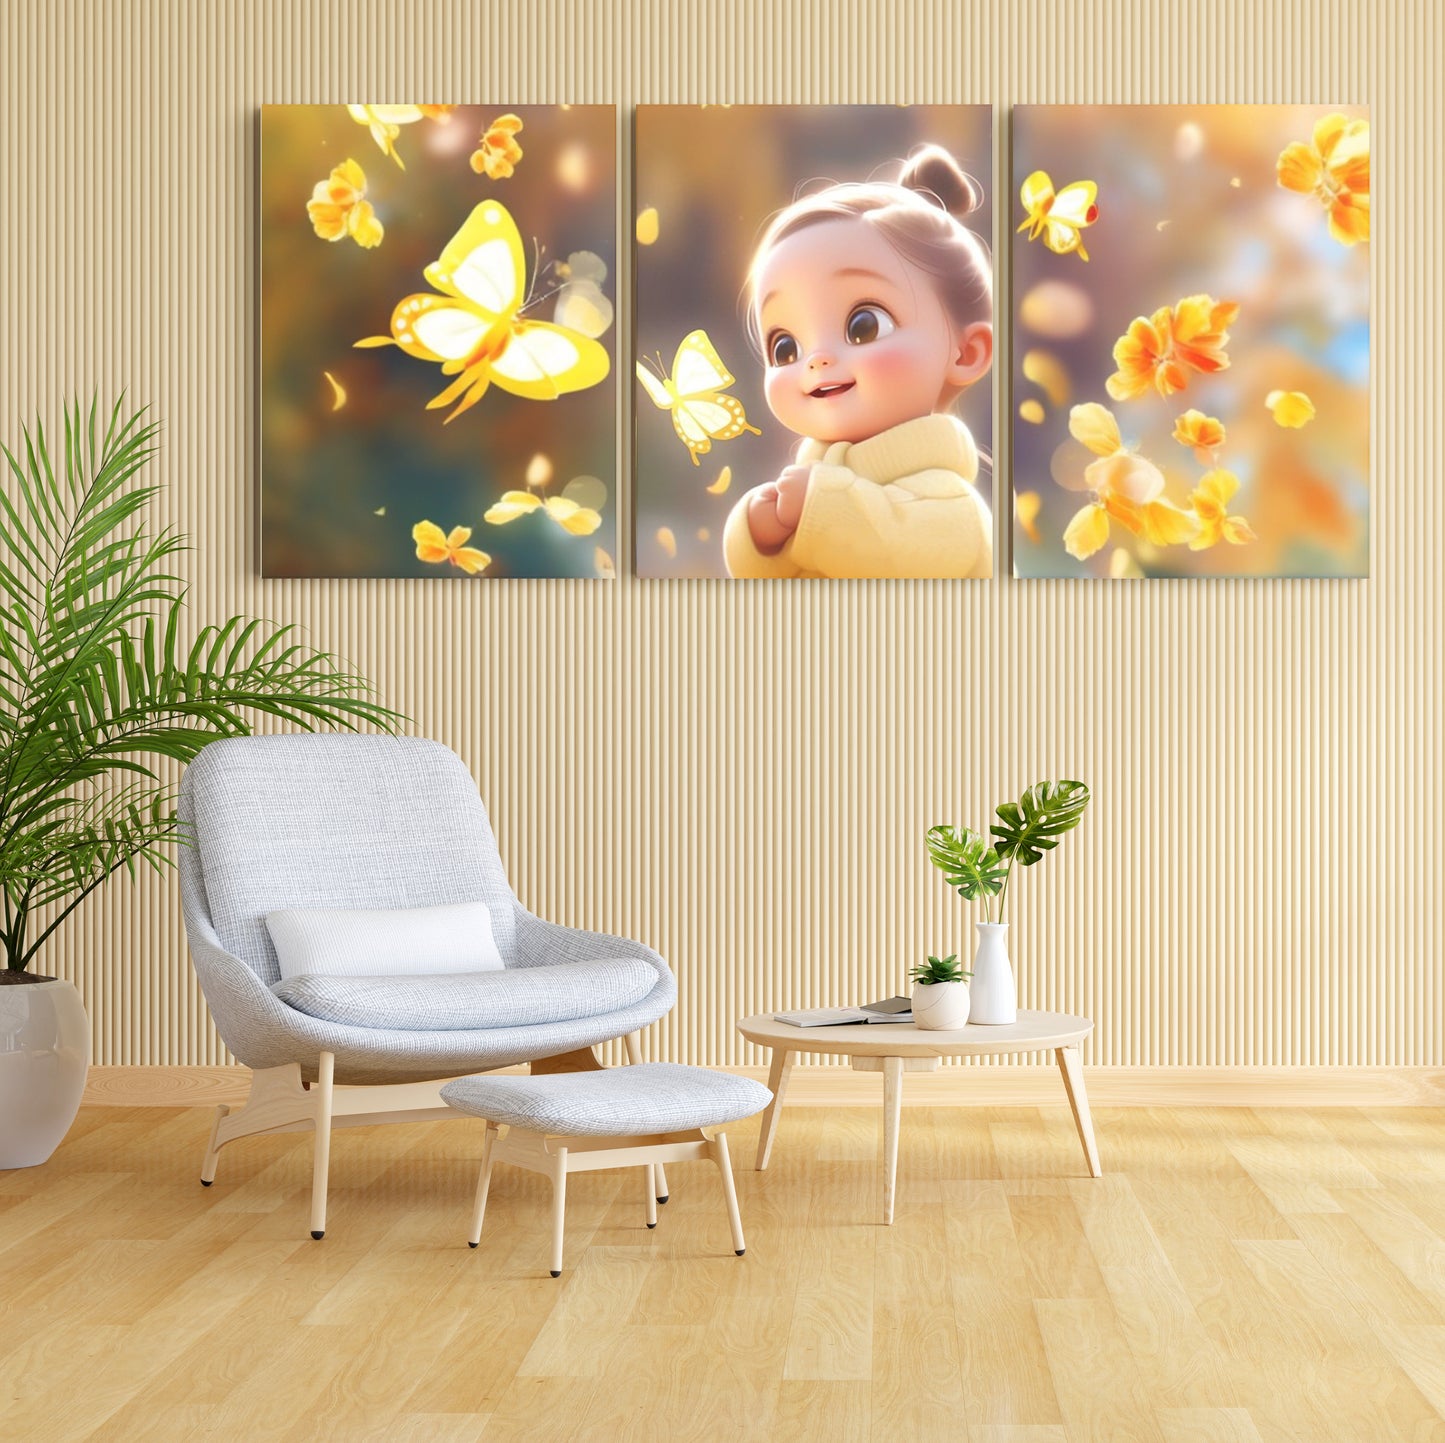 Butterfly Dreams: A Wall Art Embracing the Delightful Harmony of a Cute Baby Girl and Fluttering Butterflies - Celebrate the Whimsy of Youth and Nature's Grace - S05E72